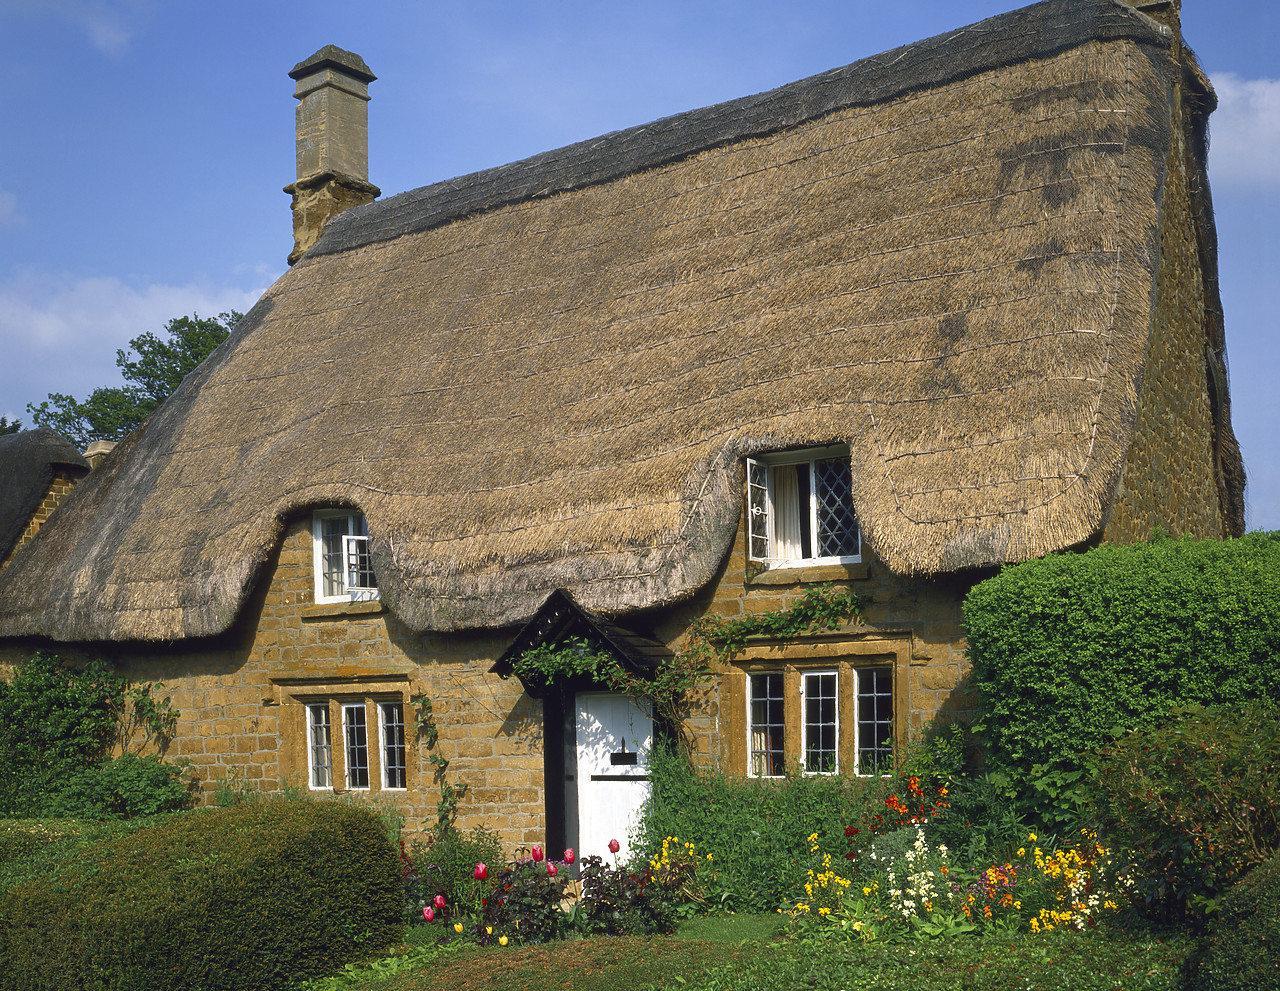 #892162-2 - Thatched Cottage & Garden, Great Tew, Oxfordshire, England